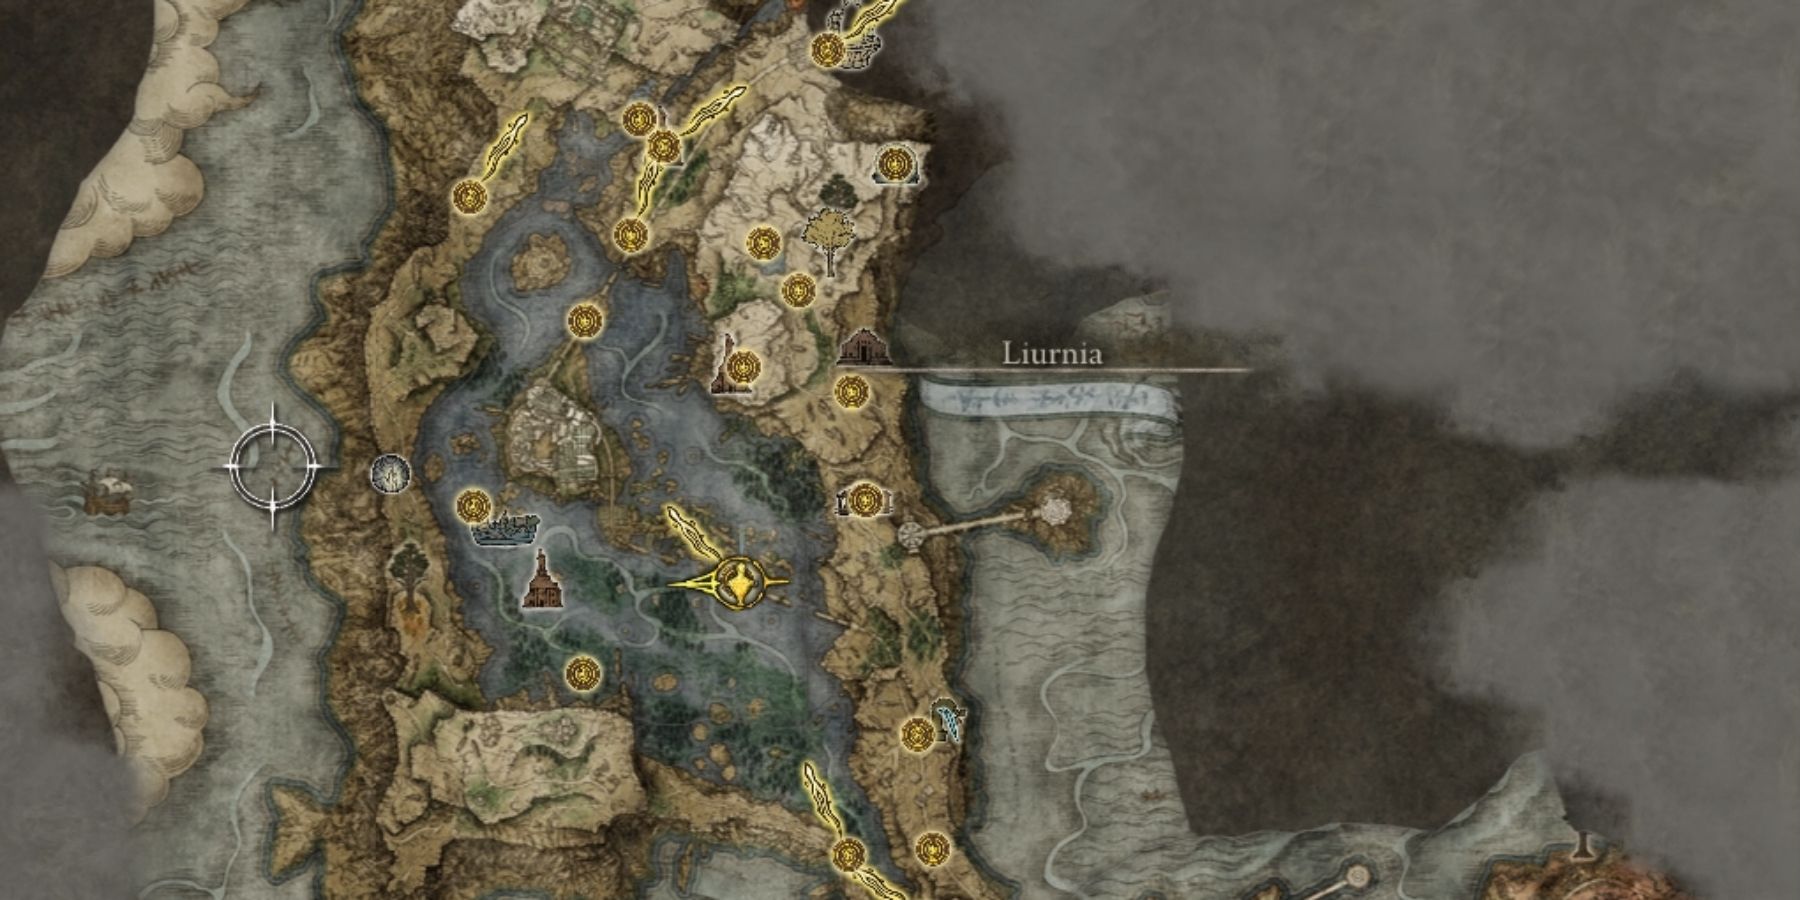 Elden Ring: All Liurnia Of The Lakes Map Fragment Locations